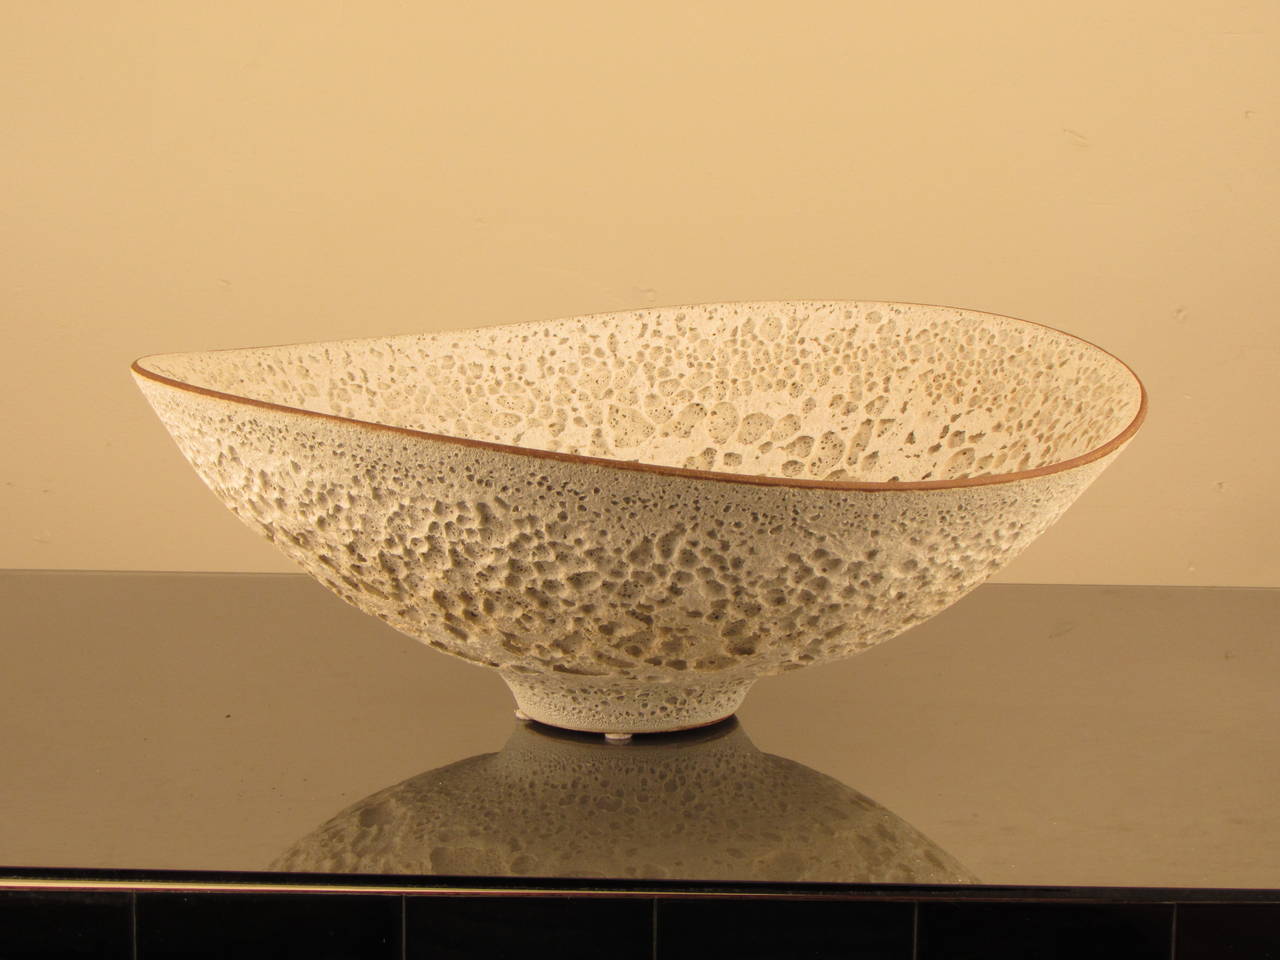 Jaw-dropping footed bowl by working studio potter, Jeremy Briddell (b.1971). This piece features a matte white crater or volcanic glaze evocative of Gertrud + Otto Natzler. Incredibly well-thrown and beautifully balanced; Briddell is a potter who